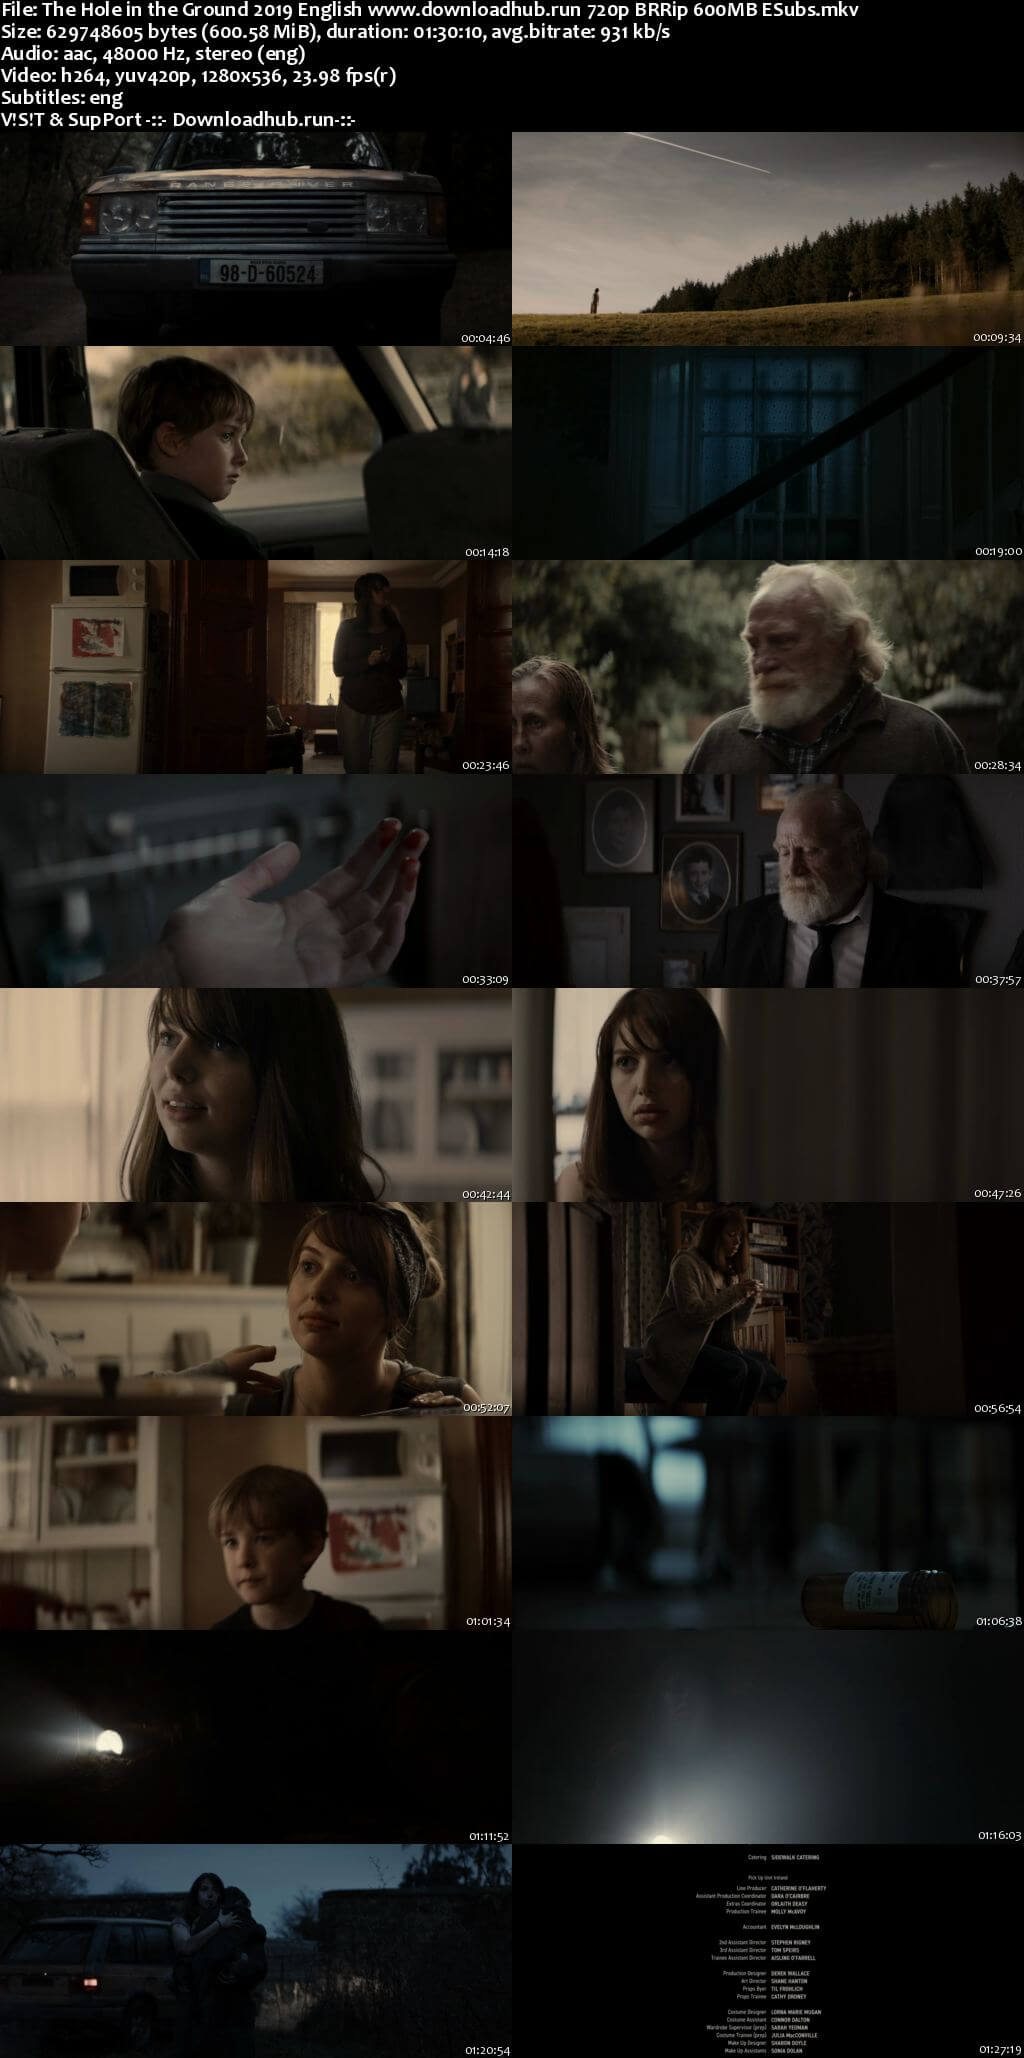 The Hole in the Ground 2019 English 720p BRRip 600MB ESubs